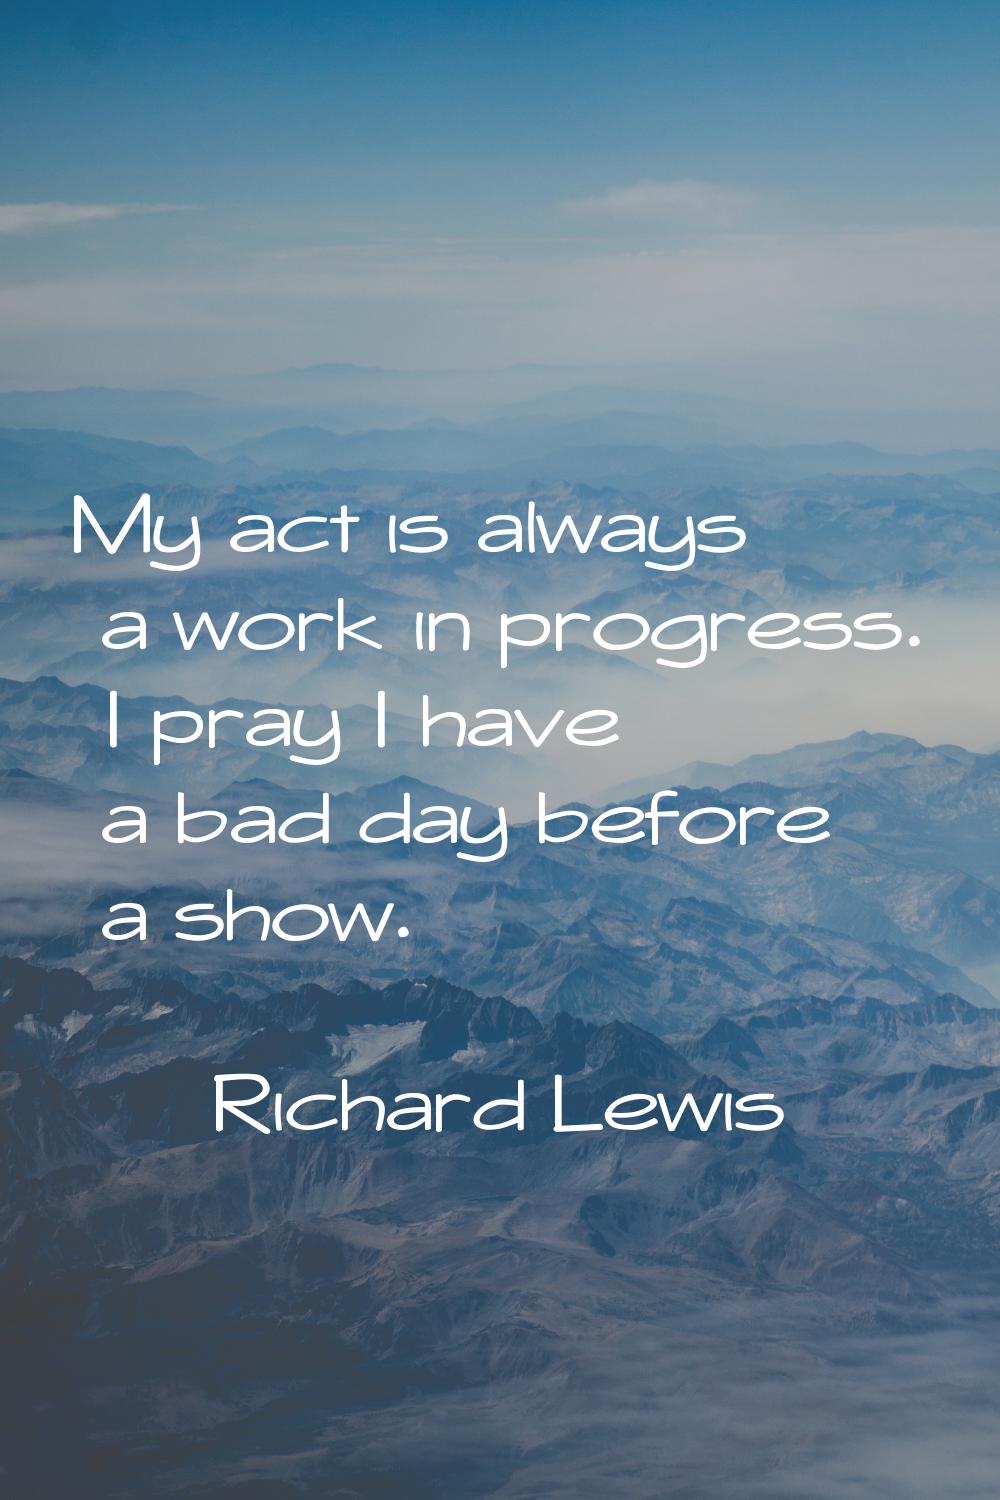 My act is always a work in progress. I pray I have a bad day before a show.